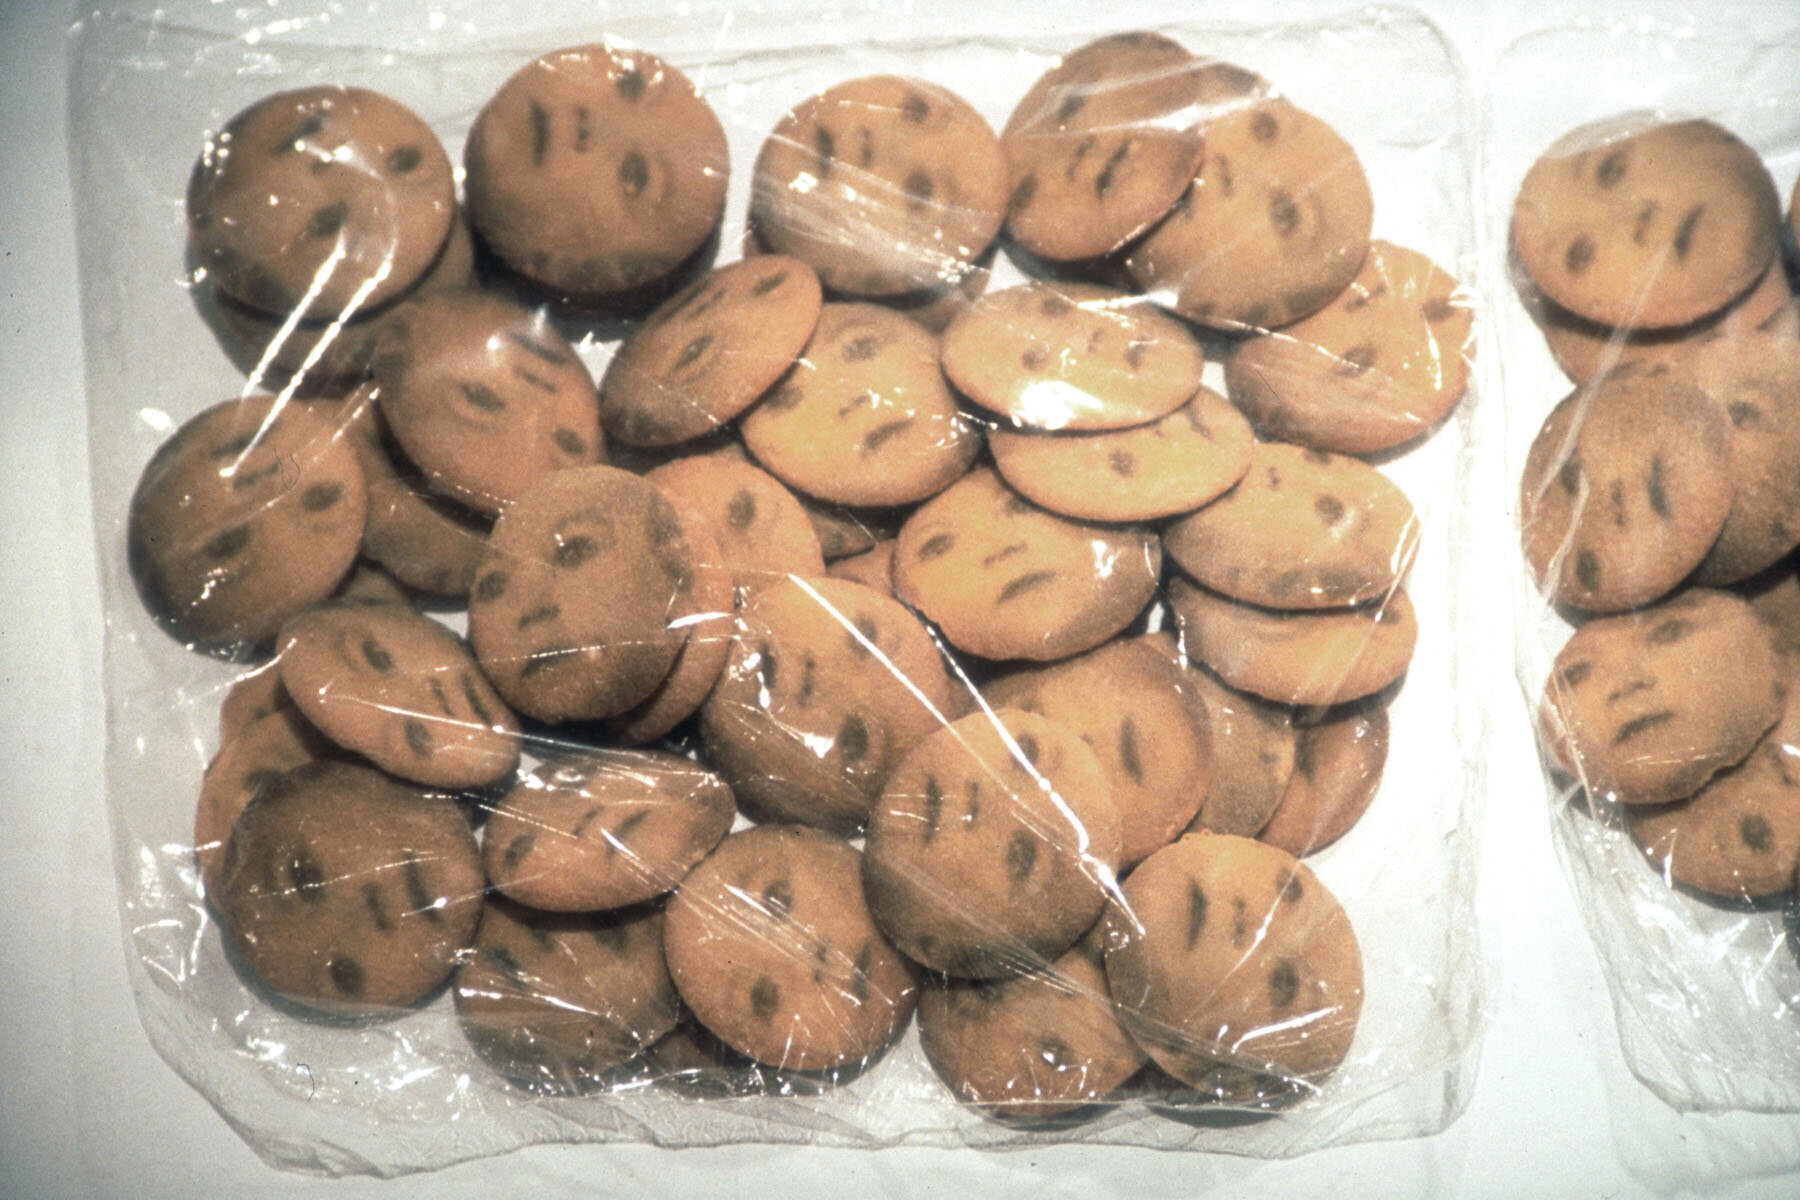   Untitled (nillas) , 1997, black food coloring on cookies, shrink wrap, 18 x 9 x 2.5 inches 